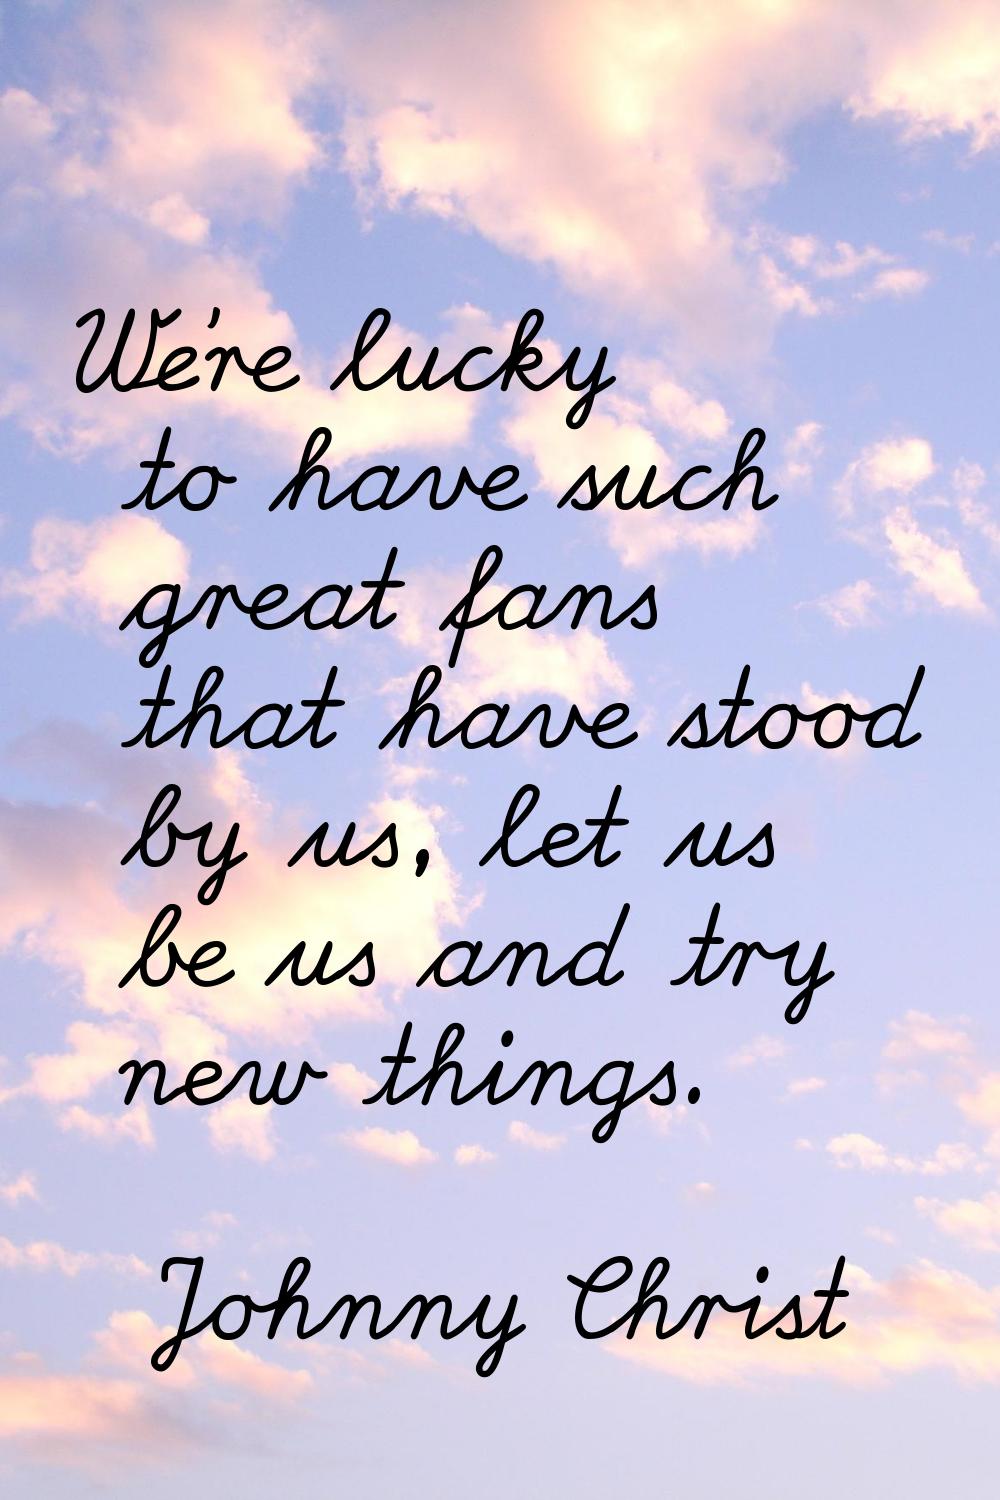 We're lucky to have such great fans that have stood by us, let us be us and try new things.